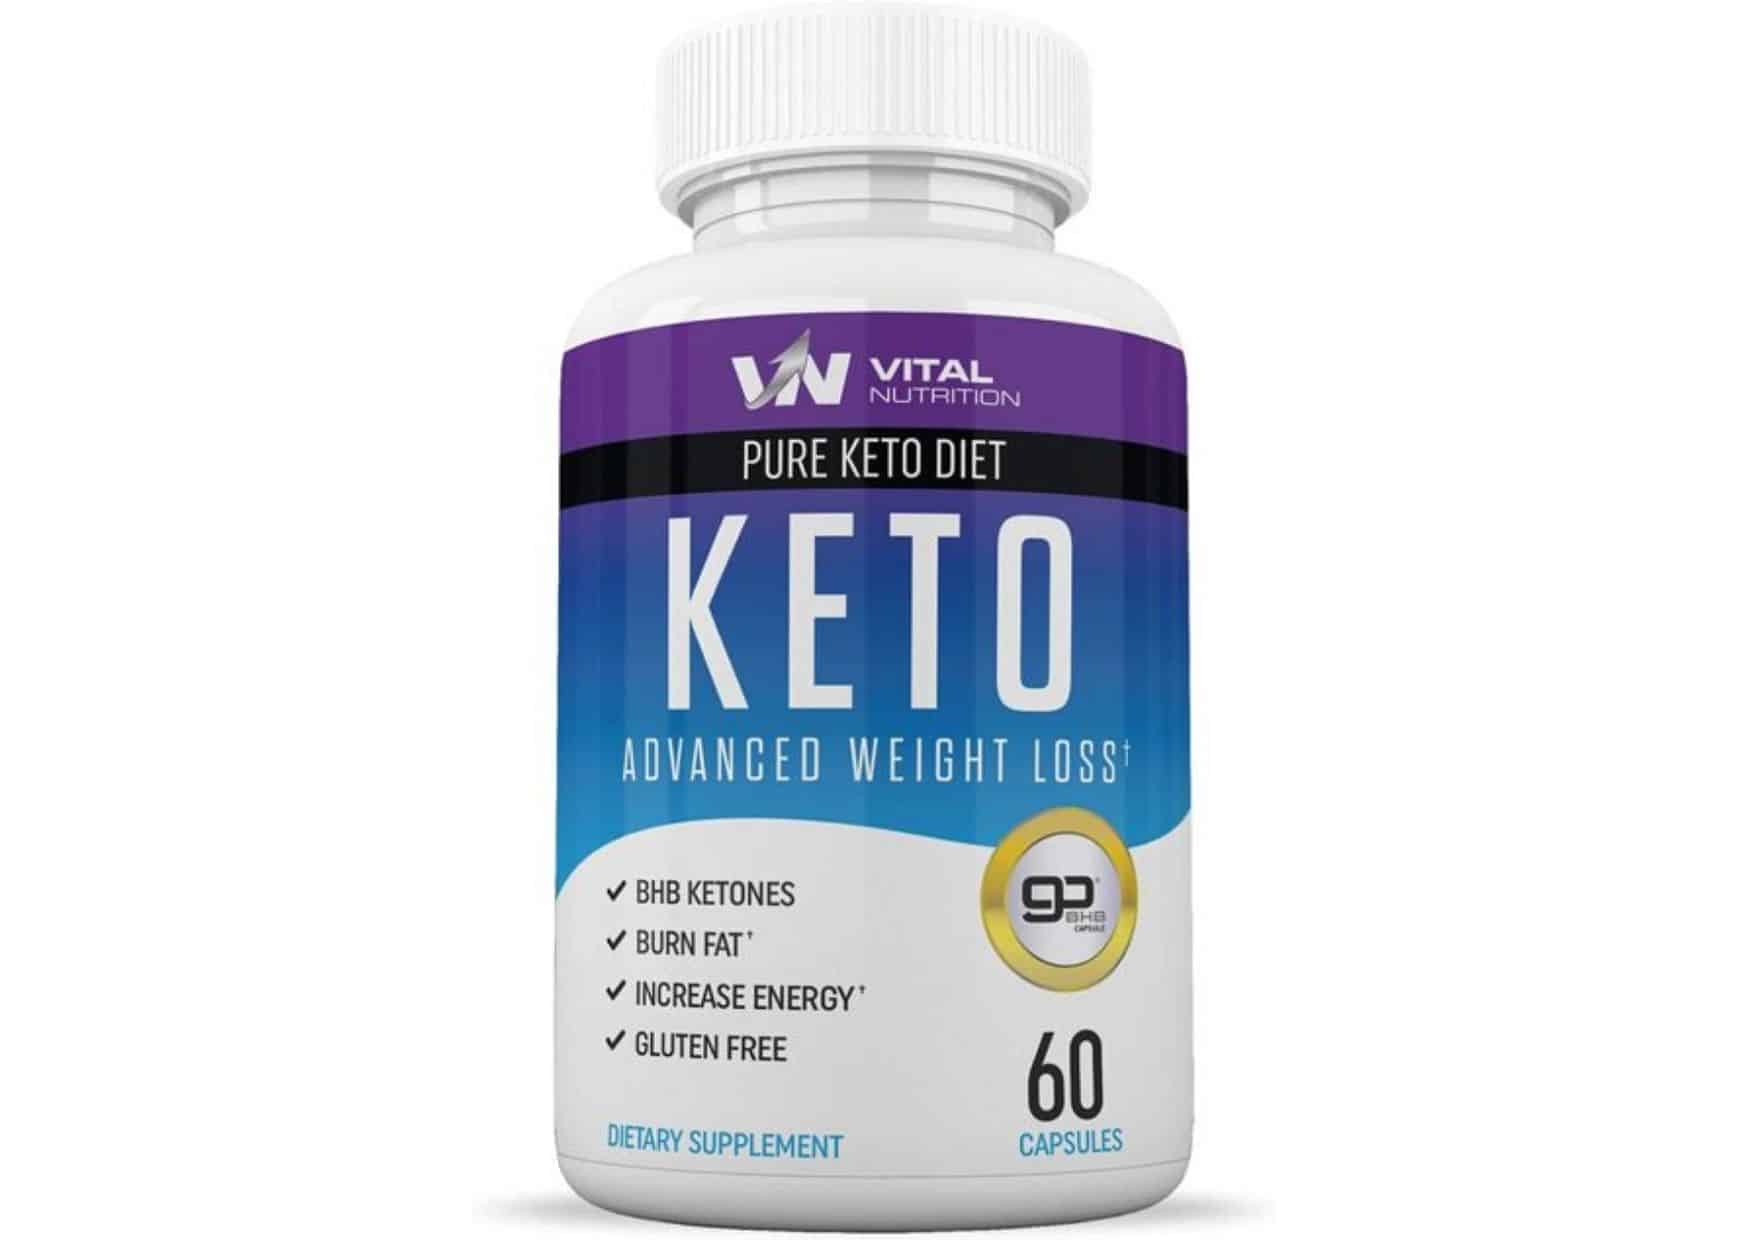 5 Best Keto Diet Pills to Help You Lose Weight